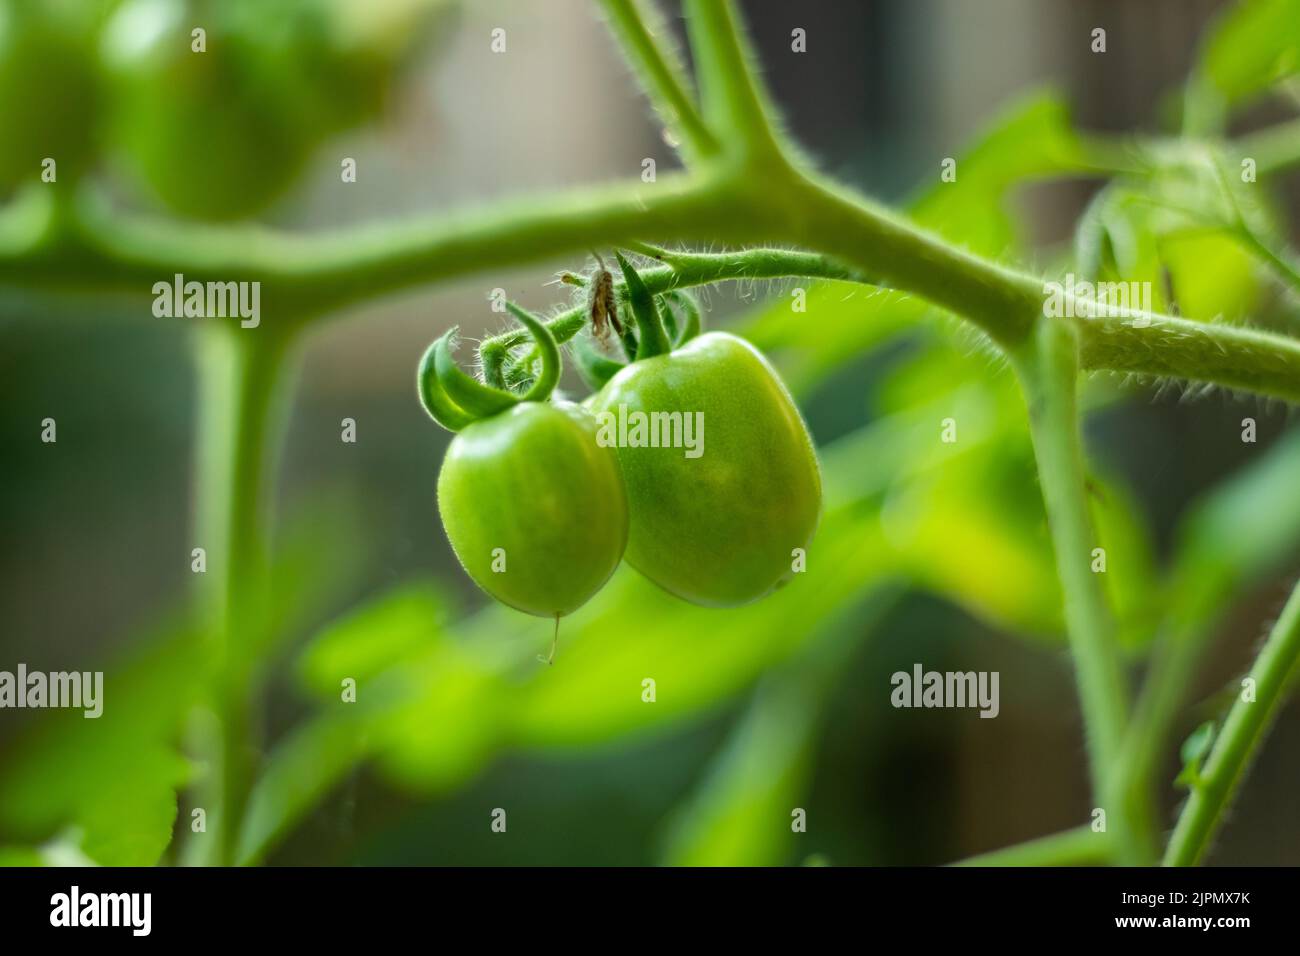 Raw or green tomatoes are many nutrients, and antioxidants, and raw tomatoes may prevent or help treat a wide range of health issues. Stock Photo